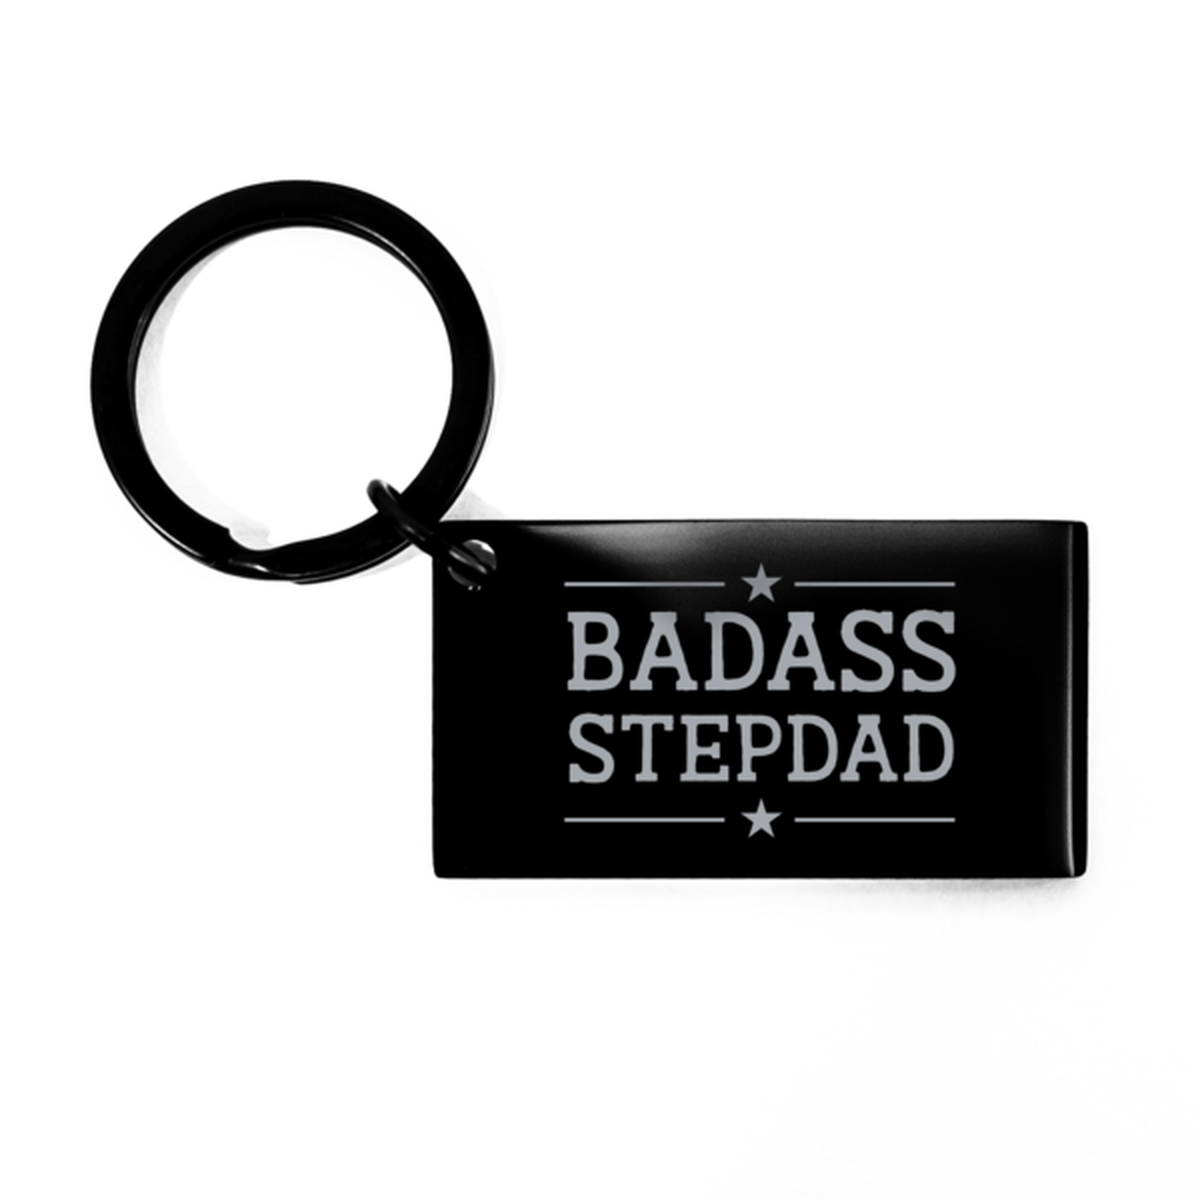 Stepdad Black Keychain, Badass Stepdad, Funny Family Gifts  Keyring For Stepdad From Son Daughter